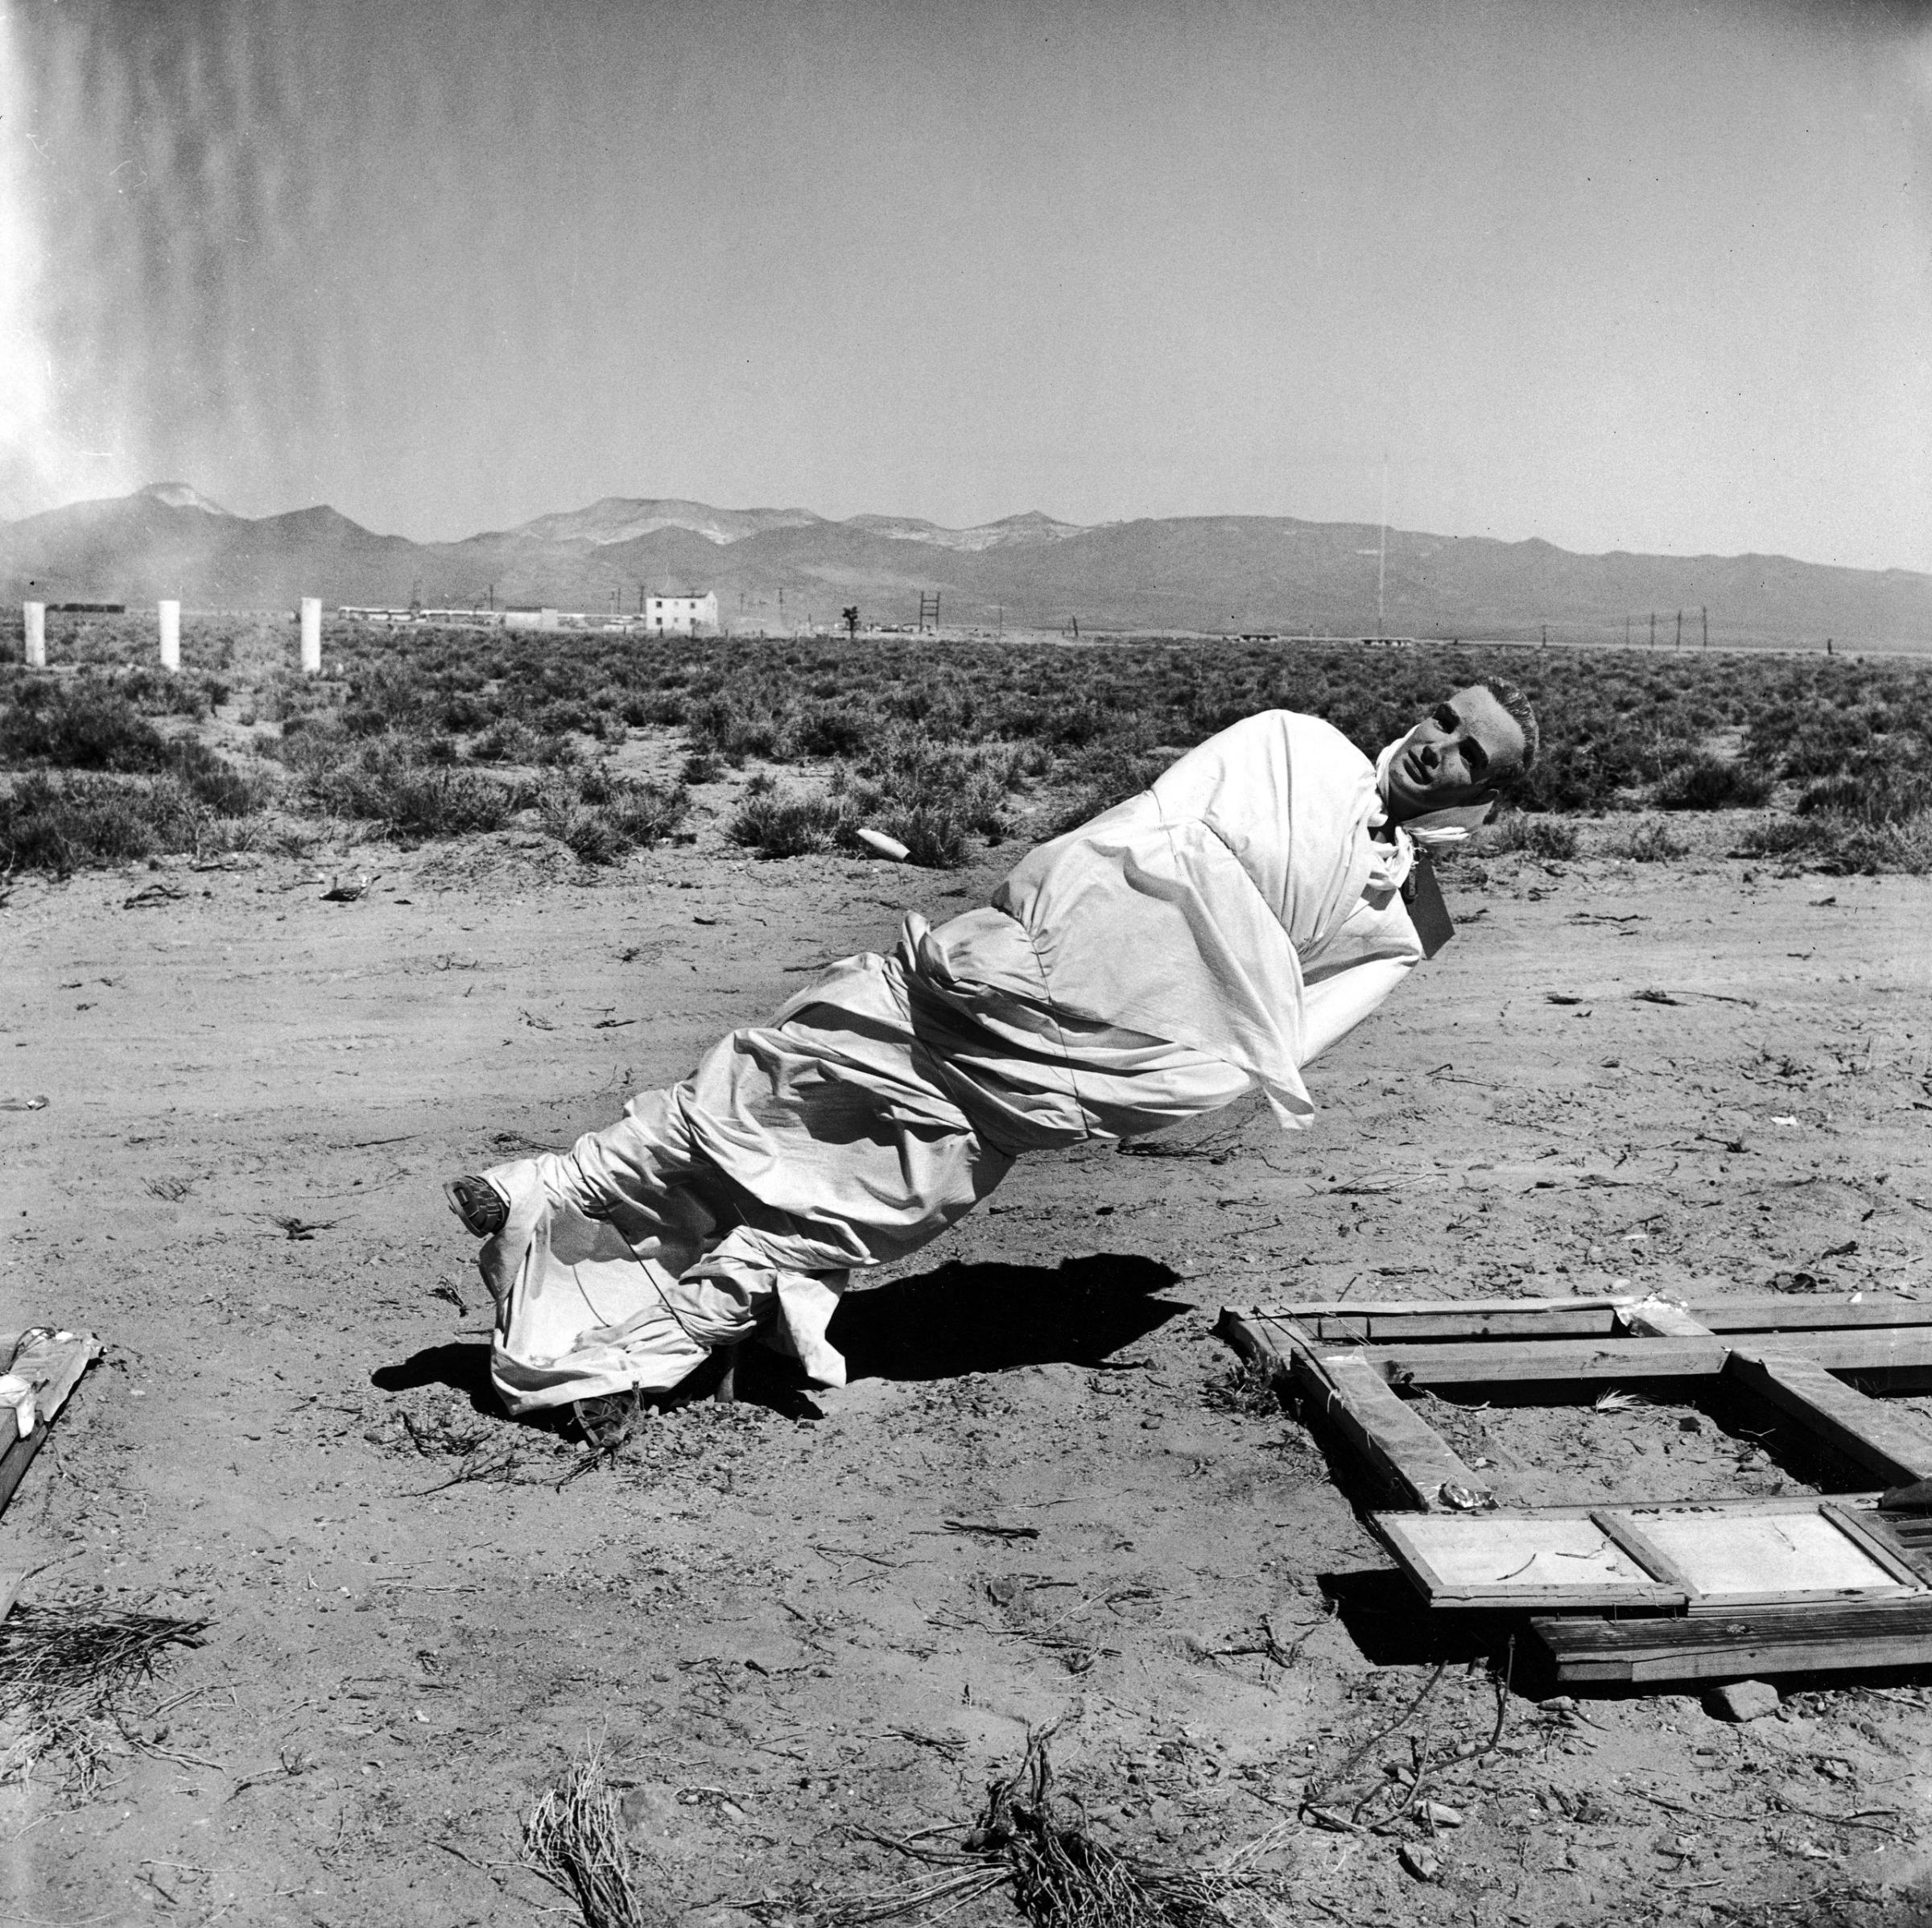 LIFE magazine pictures made after an atomic weapon test, Nevada, 1955.